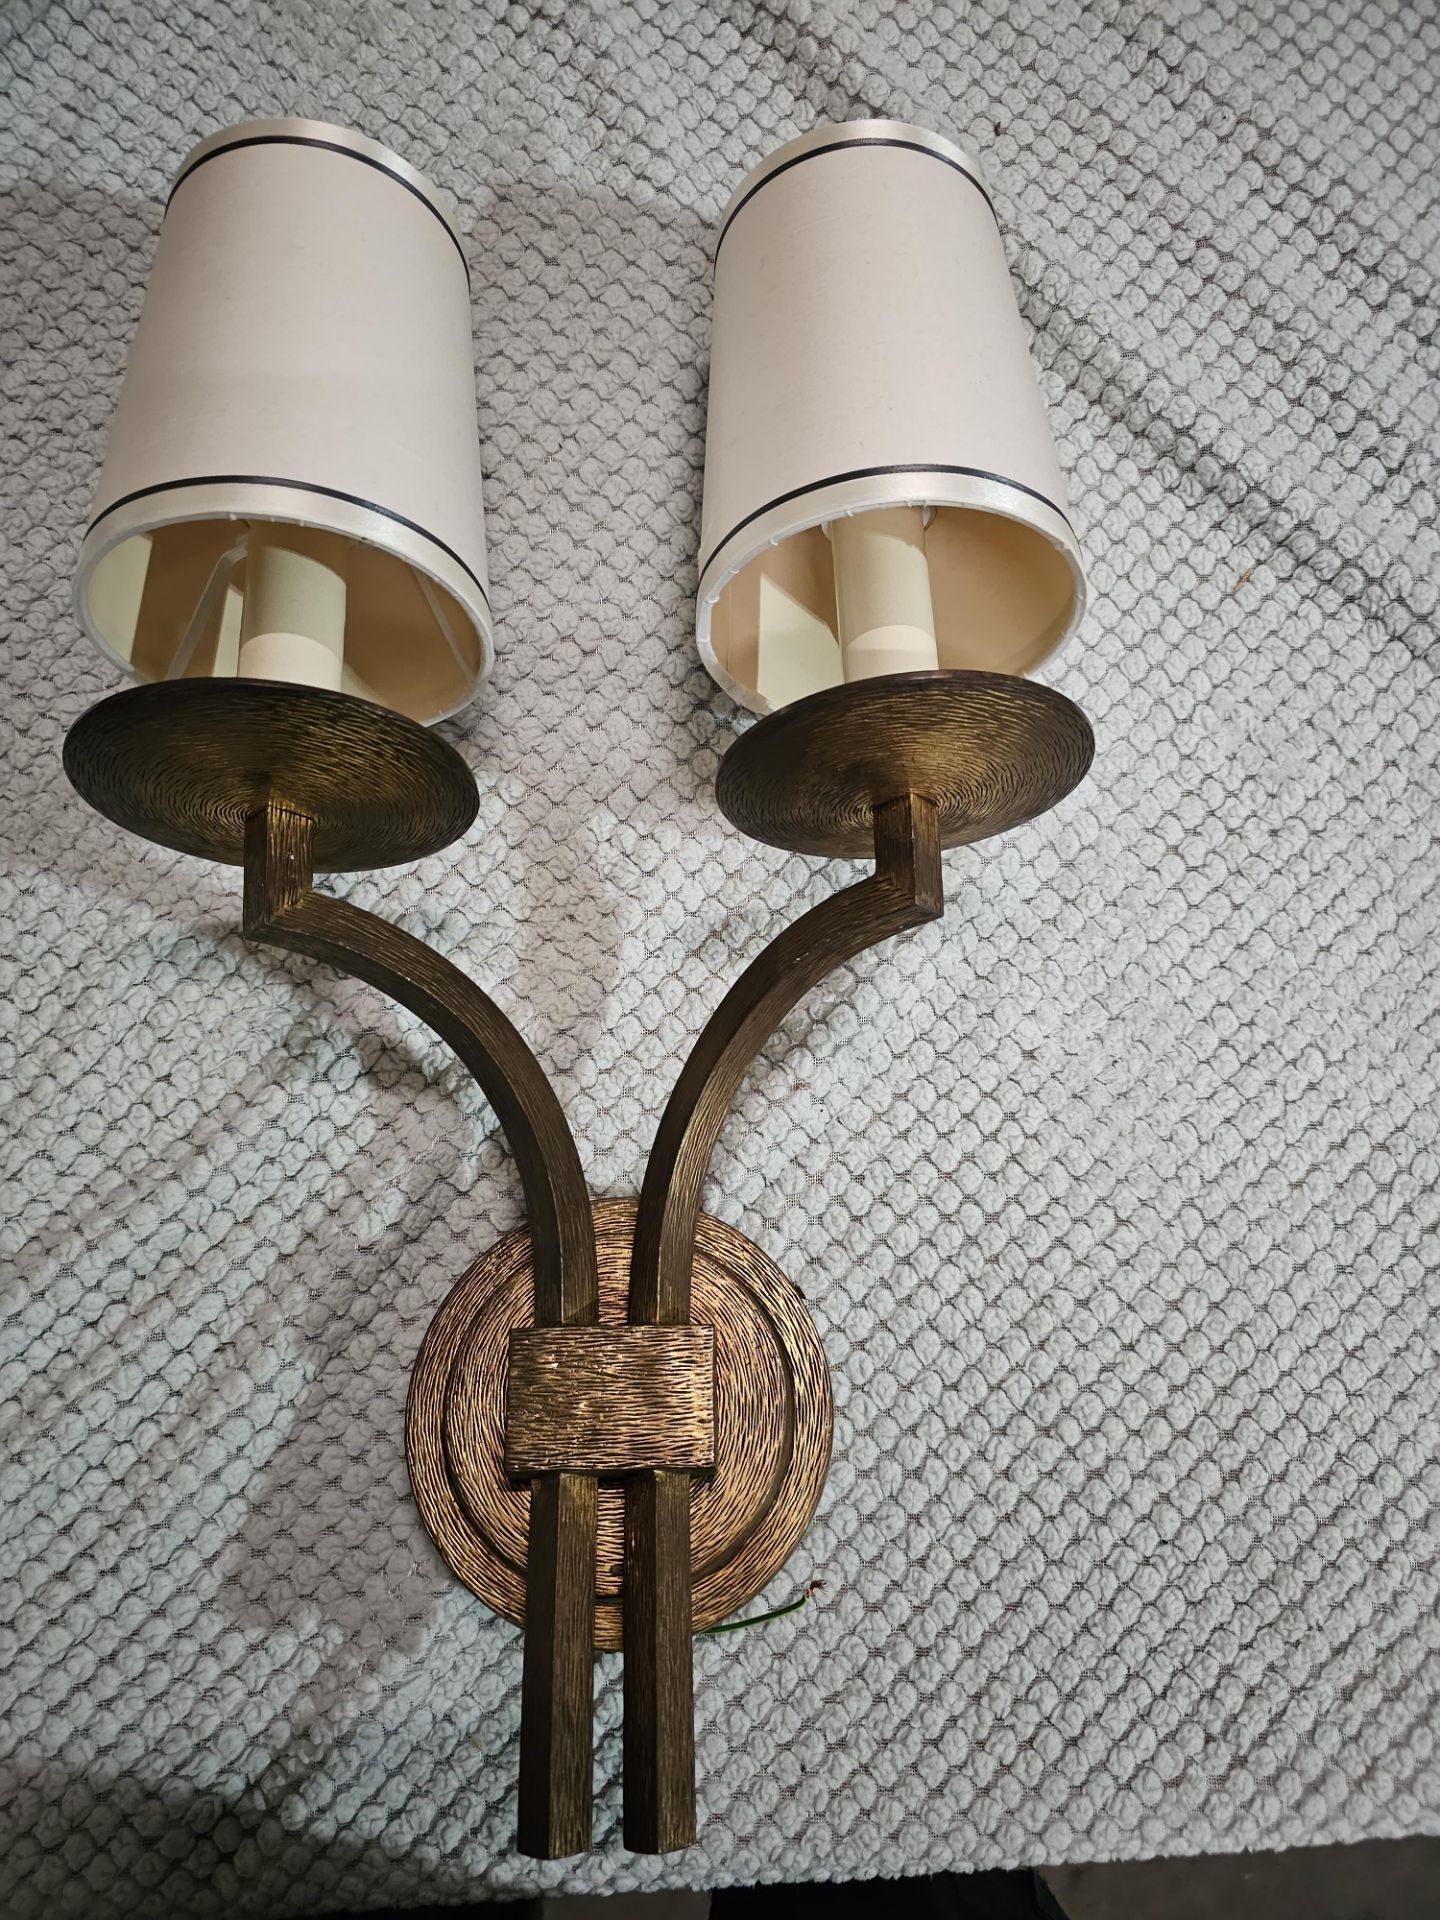 A Dernier And Hamlyn Twin Arm Antique Bronzed Wall Sconces With Shade 51cm